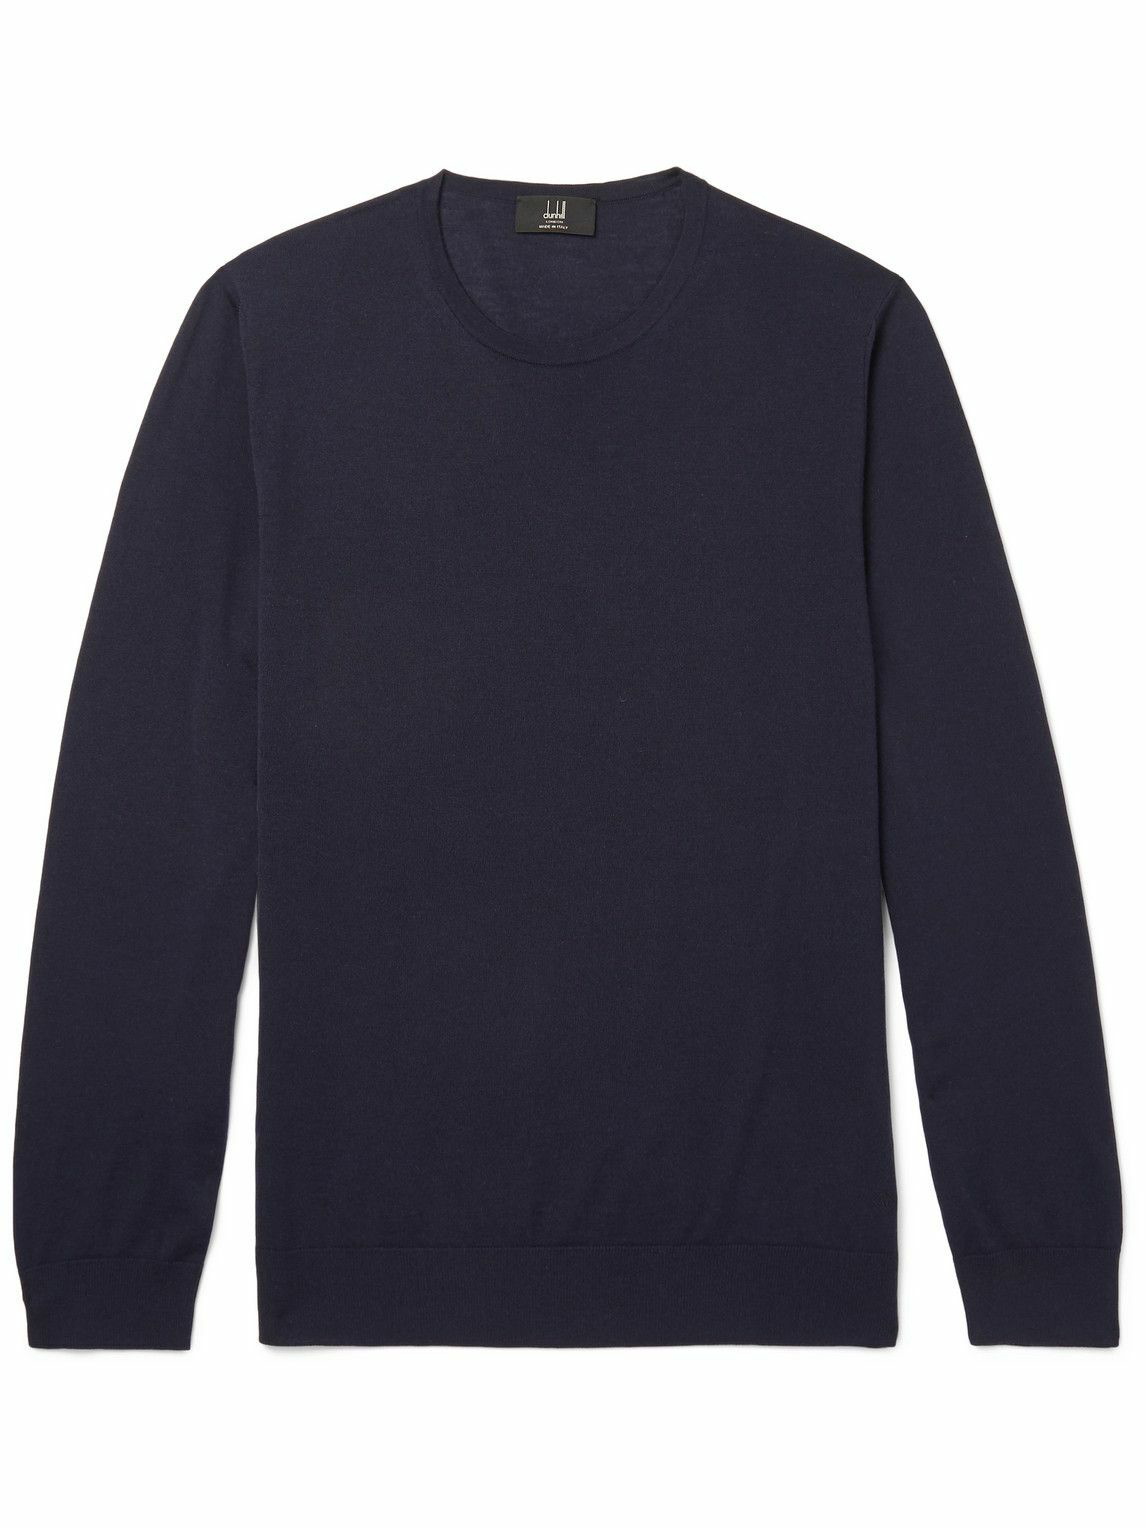 Dunhill - Merino Wool Sweater - Blue Dunhill